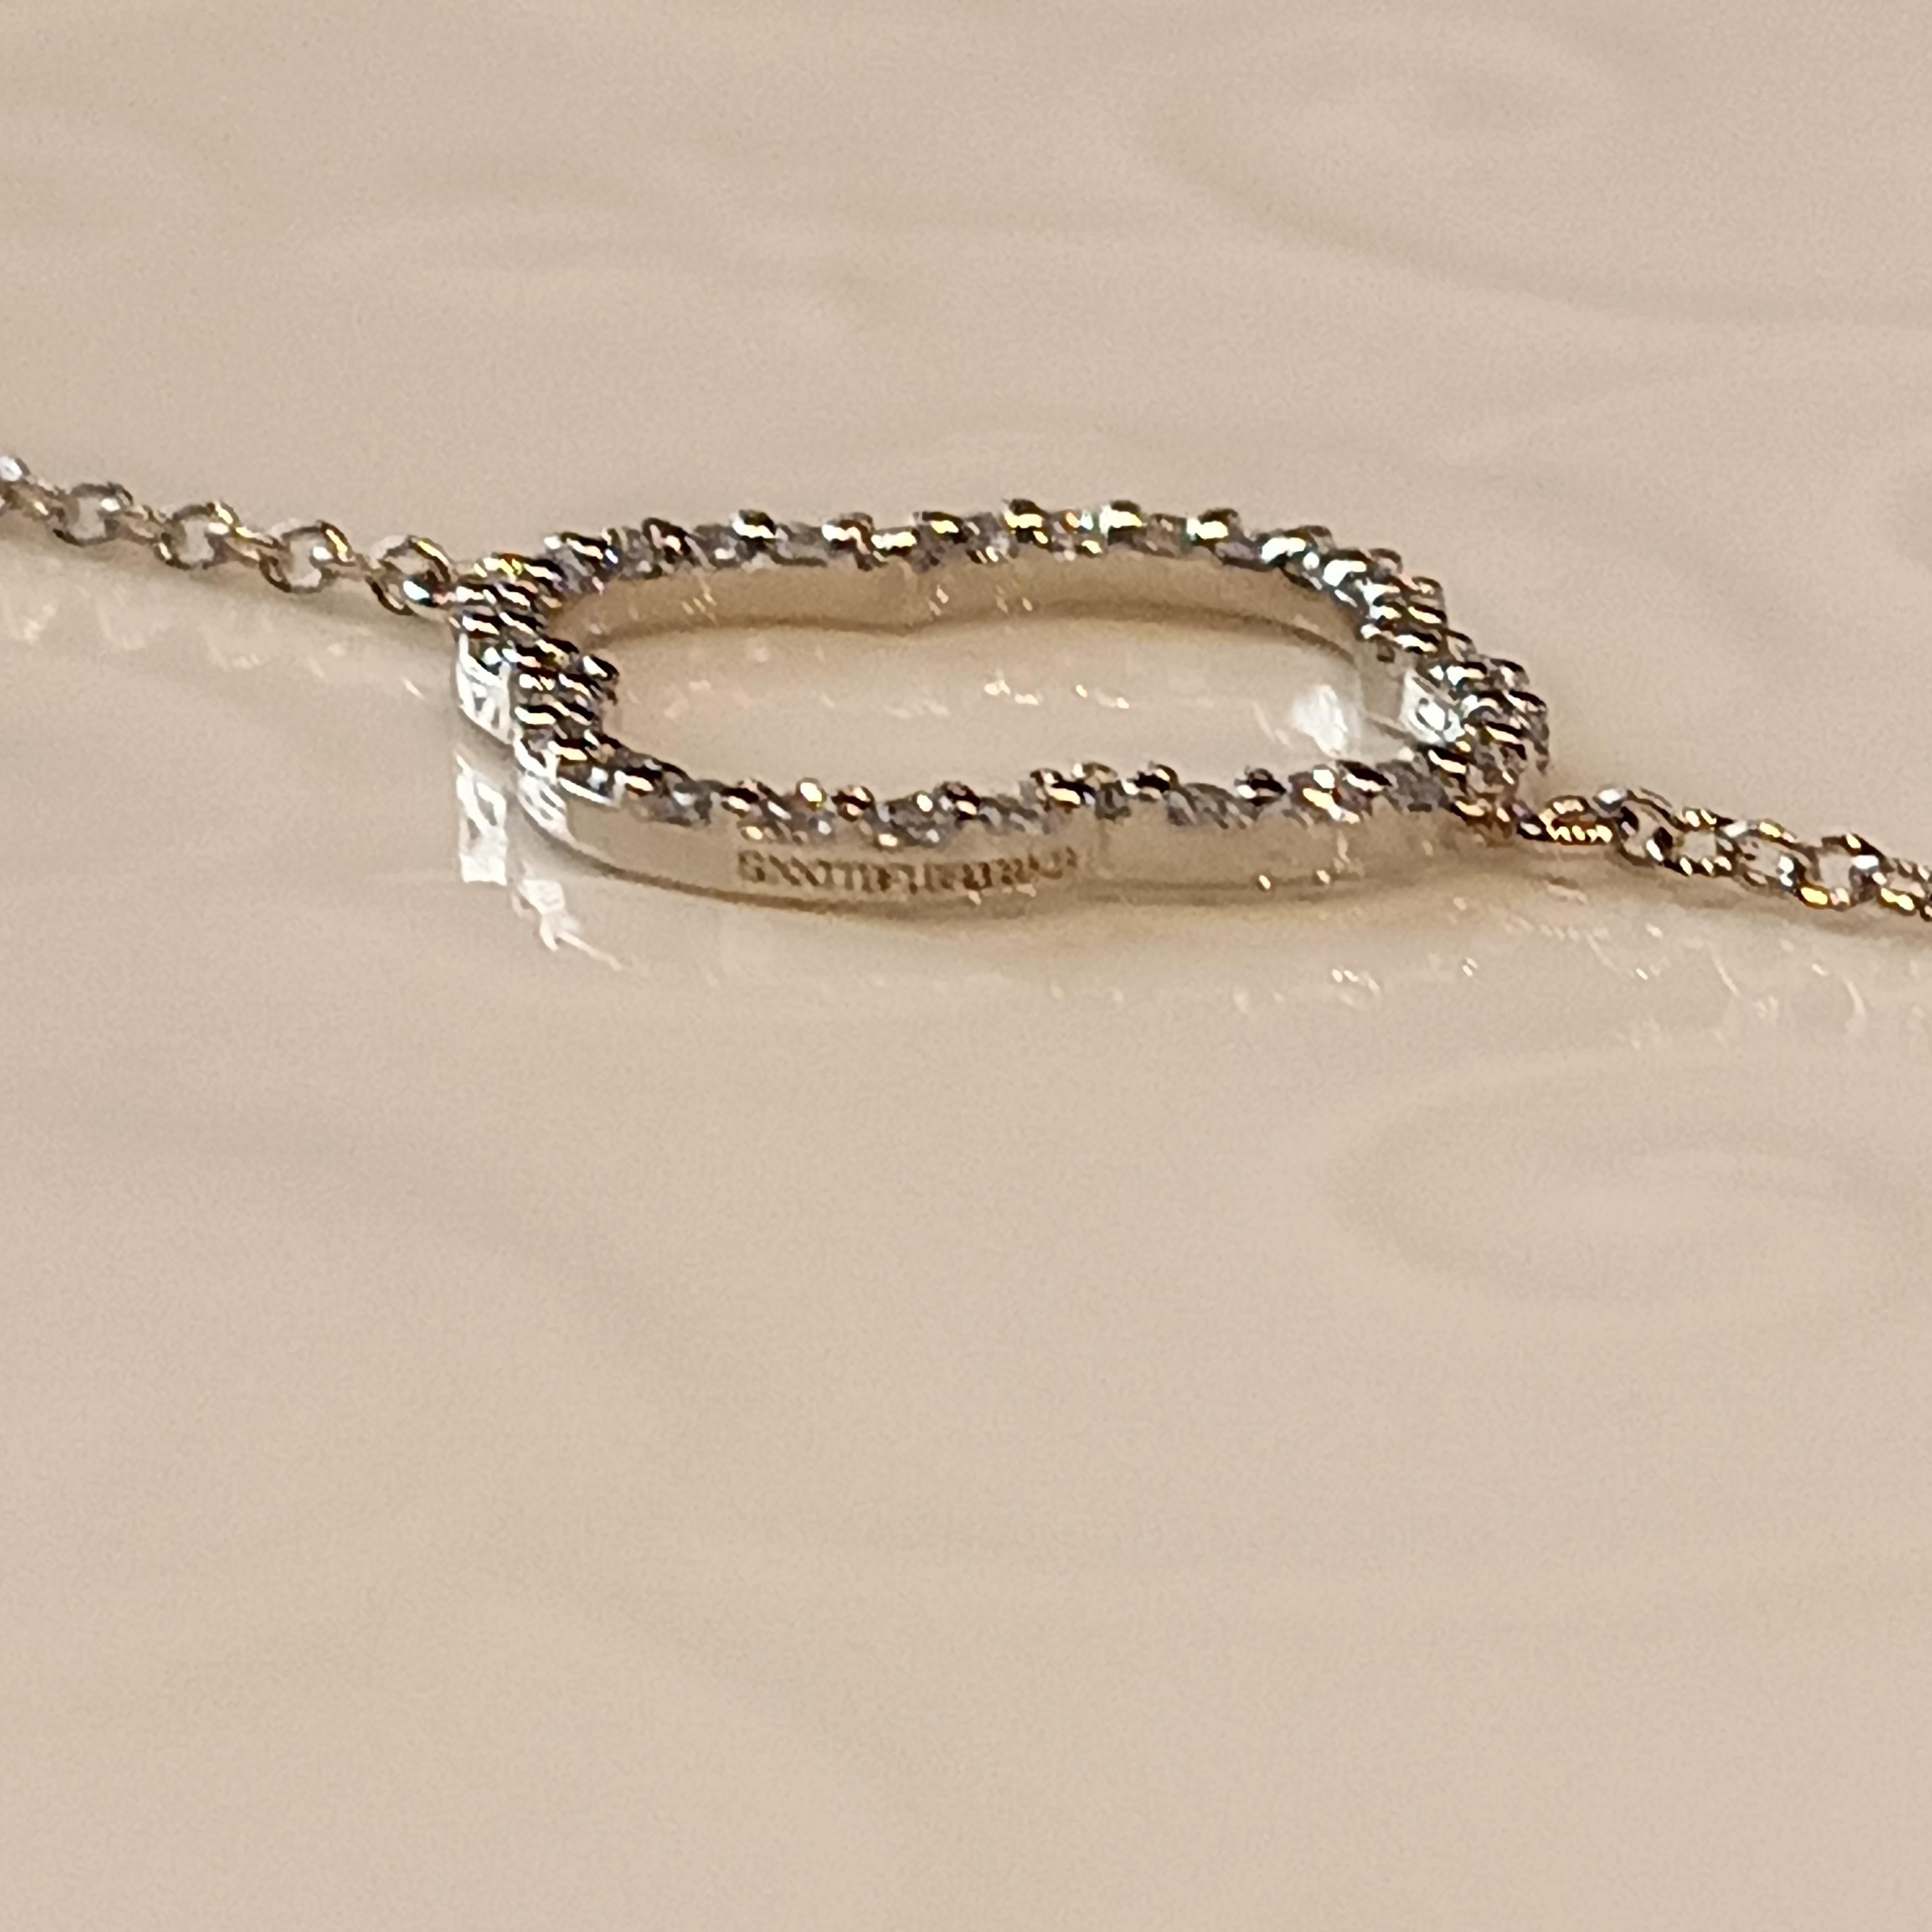 Magnificent and bright VS G color diamond  Carat 0.68 Bracelet in 18 carat white gold Grams 4.02 total diamonds stones 68
Simplicity at it's best, one of our most sold item. the size of the bracelet starts to 17.5 cm and is adjustable up to